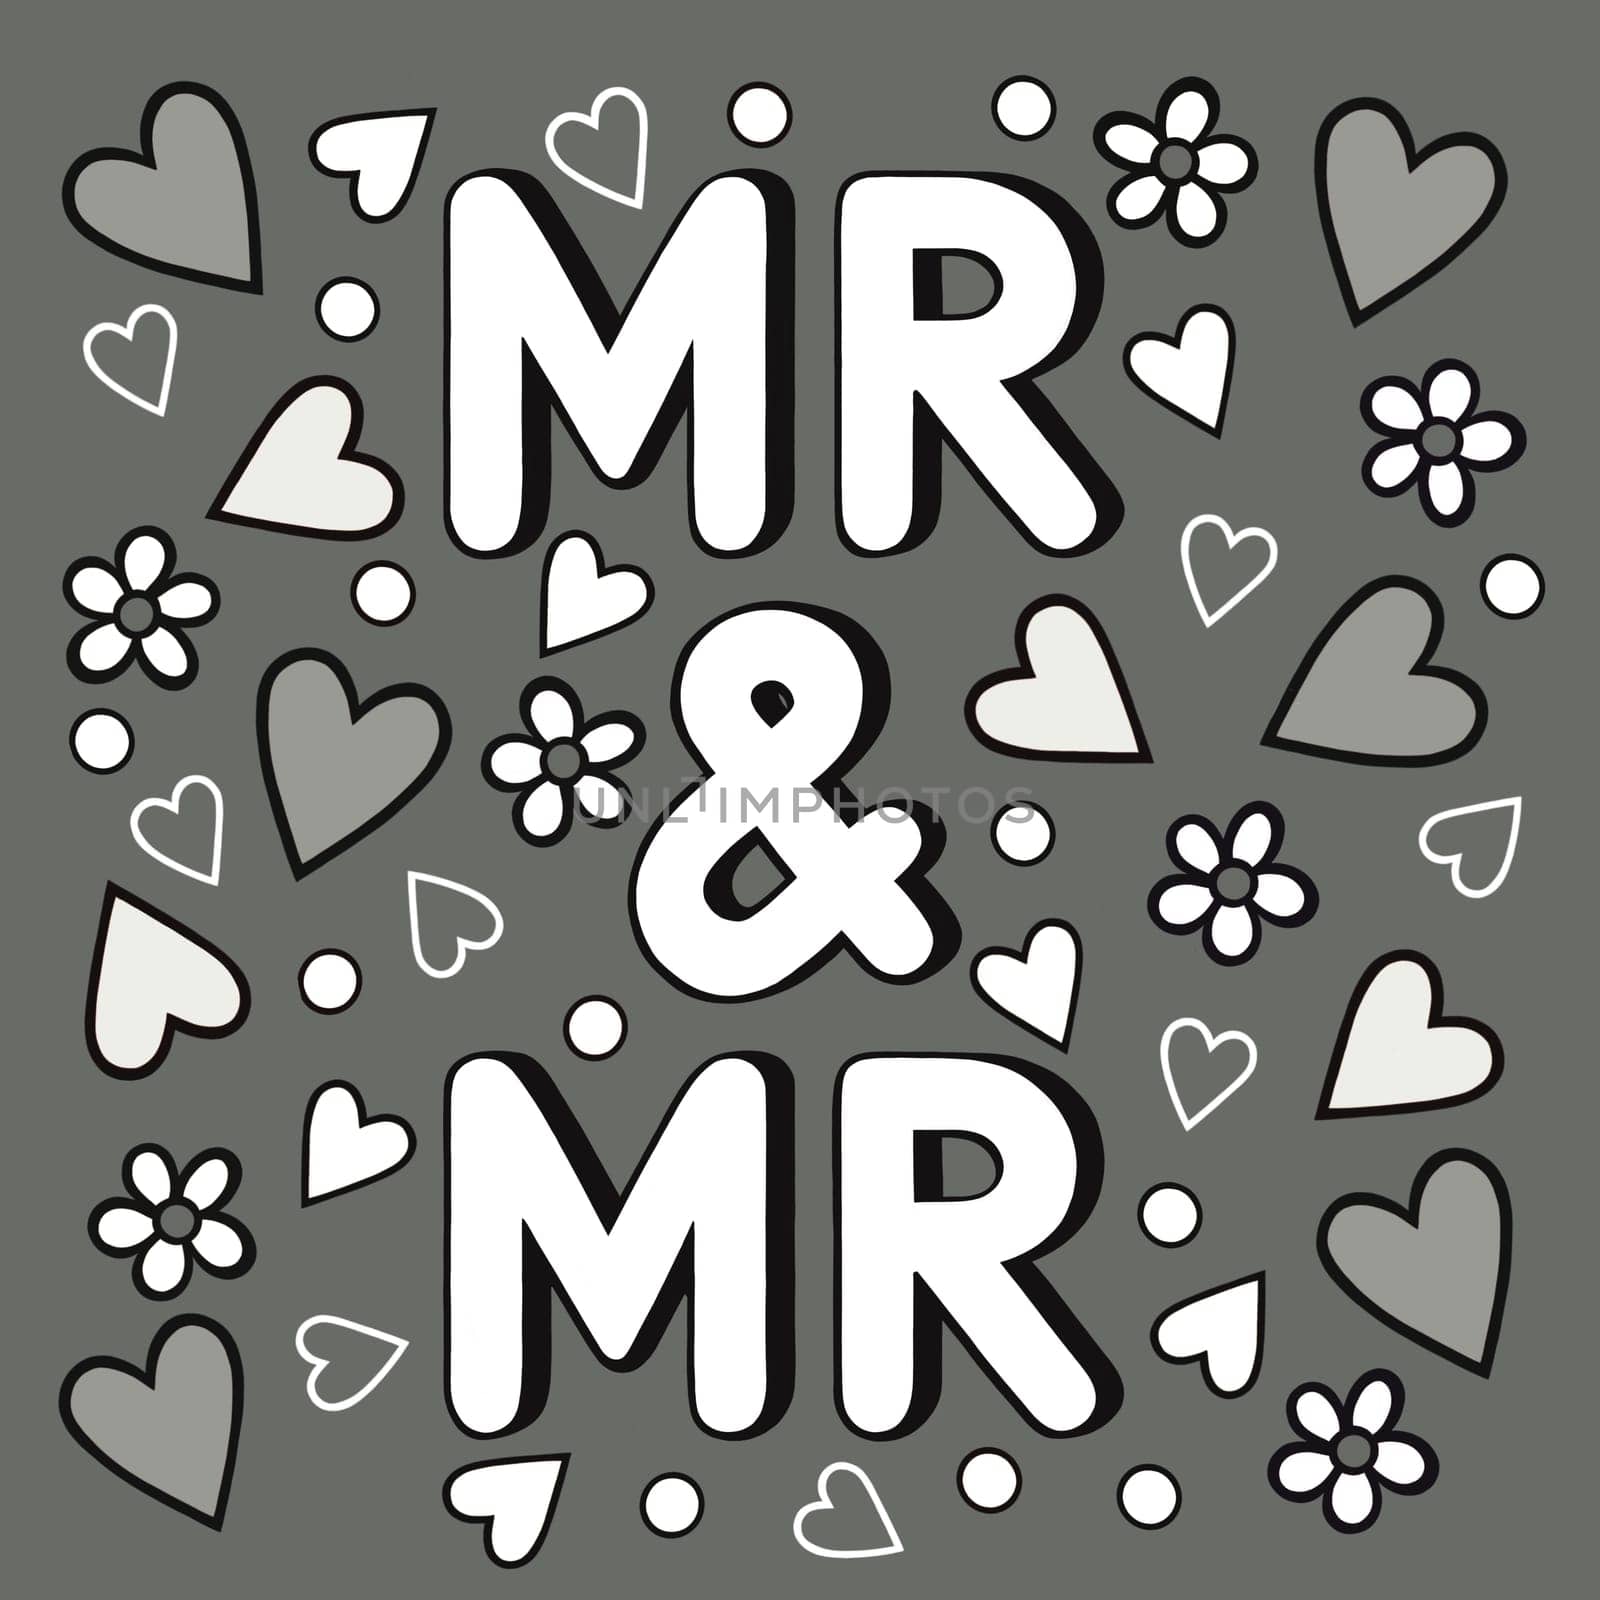 Wedding sign in a quirky, contemporary, cartoon style. Mr and Mr text in white on a grey background. Design contains hearts and flower confetti floating down round the word art. Modern artwork.